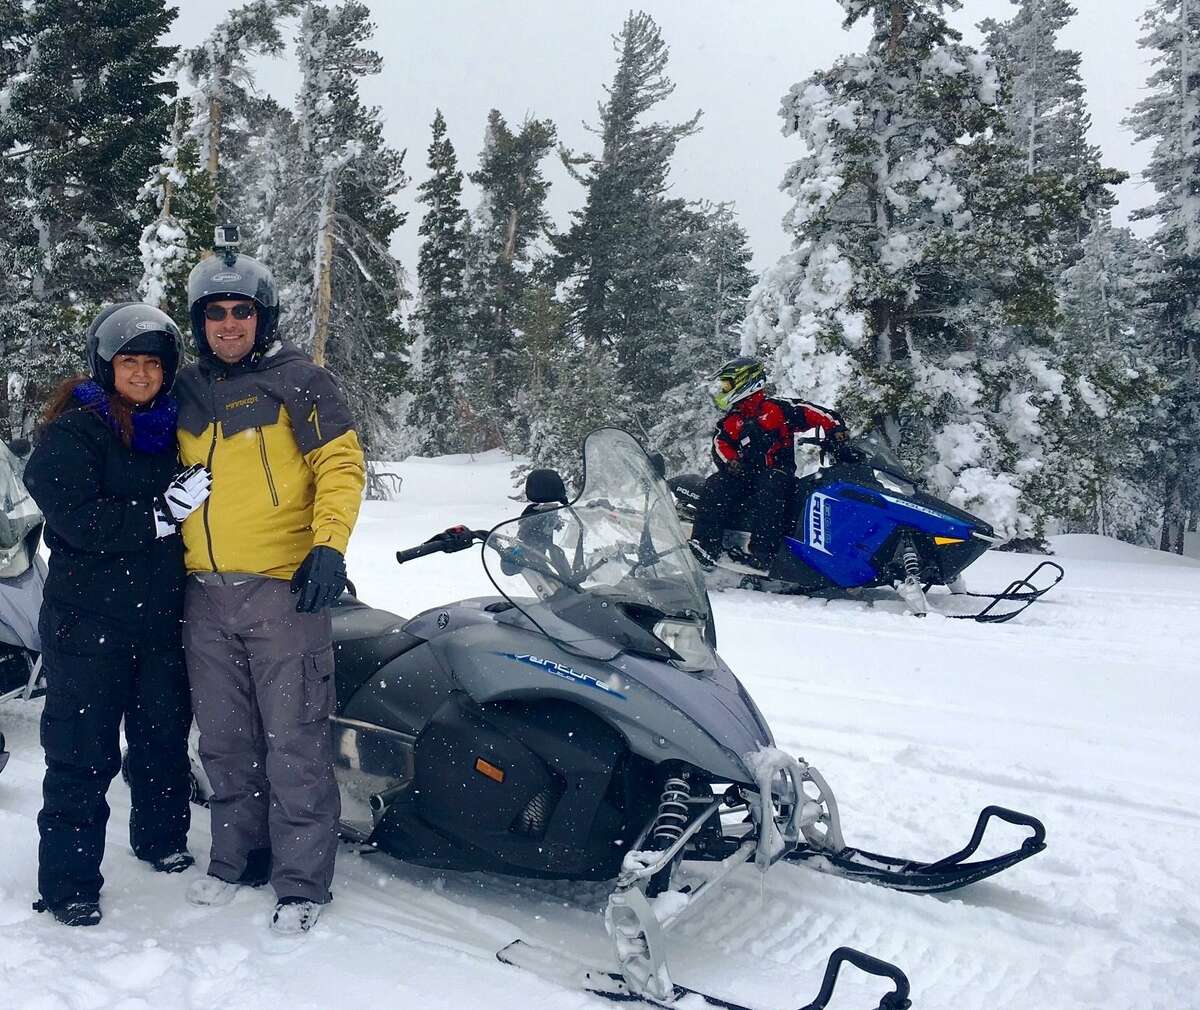 Laurie and Robert Plumas pose while snowmobiling during the 2016 honeymoon to the Lake Tahoe area. The San Antonio couple raised money to pay for most of their honeymoon on the crowdfunding website Honeyfund.